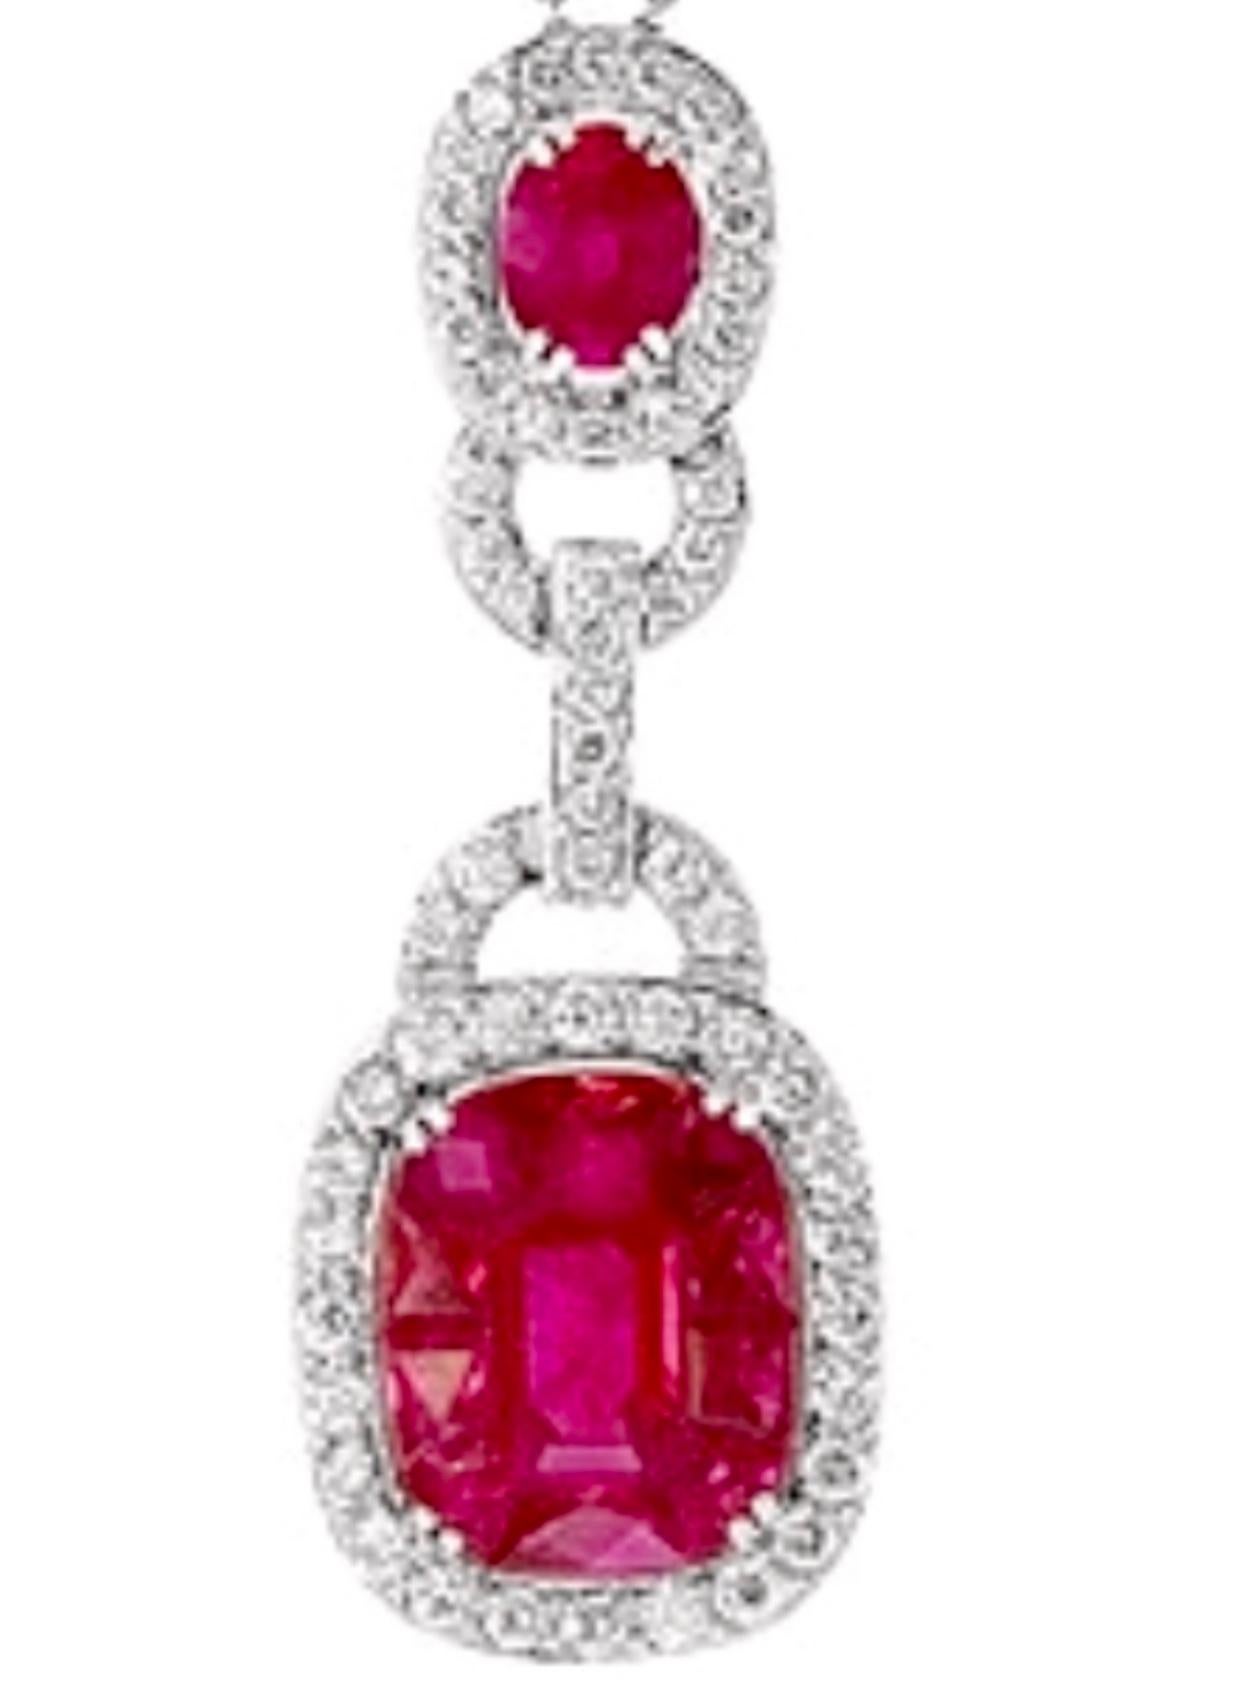 3.5 Carat Natural Burma Ruby and Diamond Pendant Necklace 18 Karat Gold 
This spectacular Pendant Necklace consisting of natural Burma ruby. One Emerald shape ruby piece in the center which look like a single piece but in fact there is a center